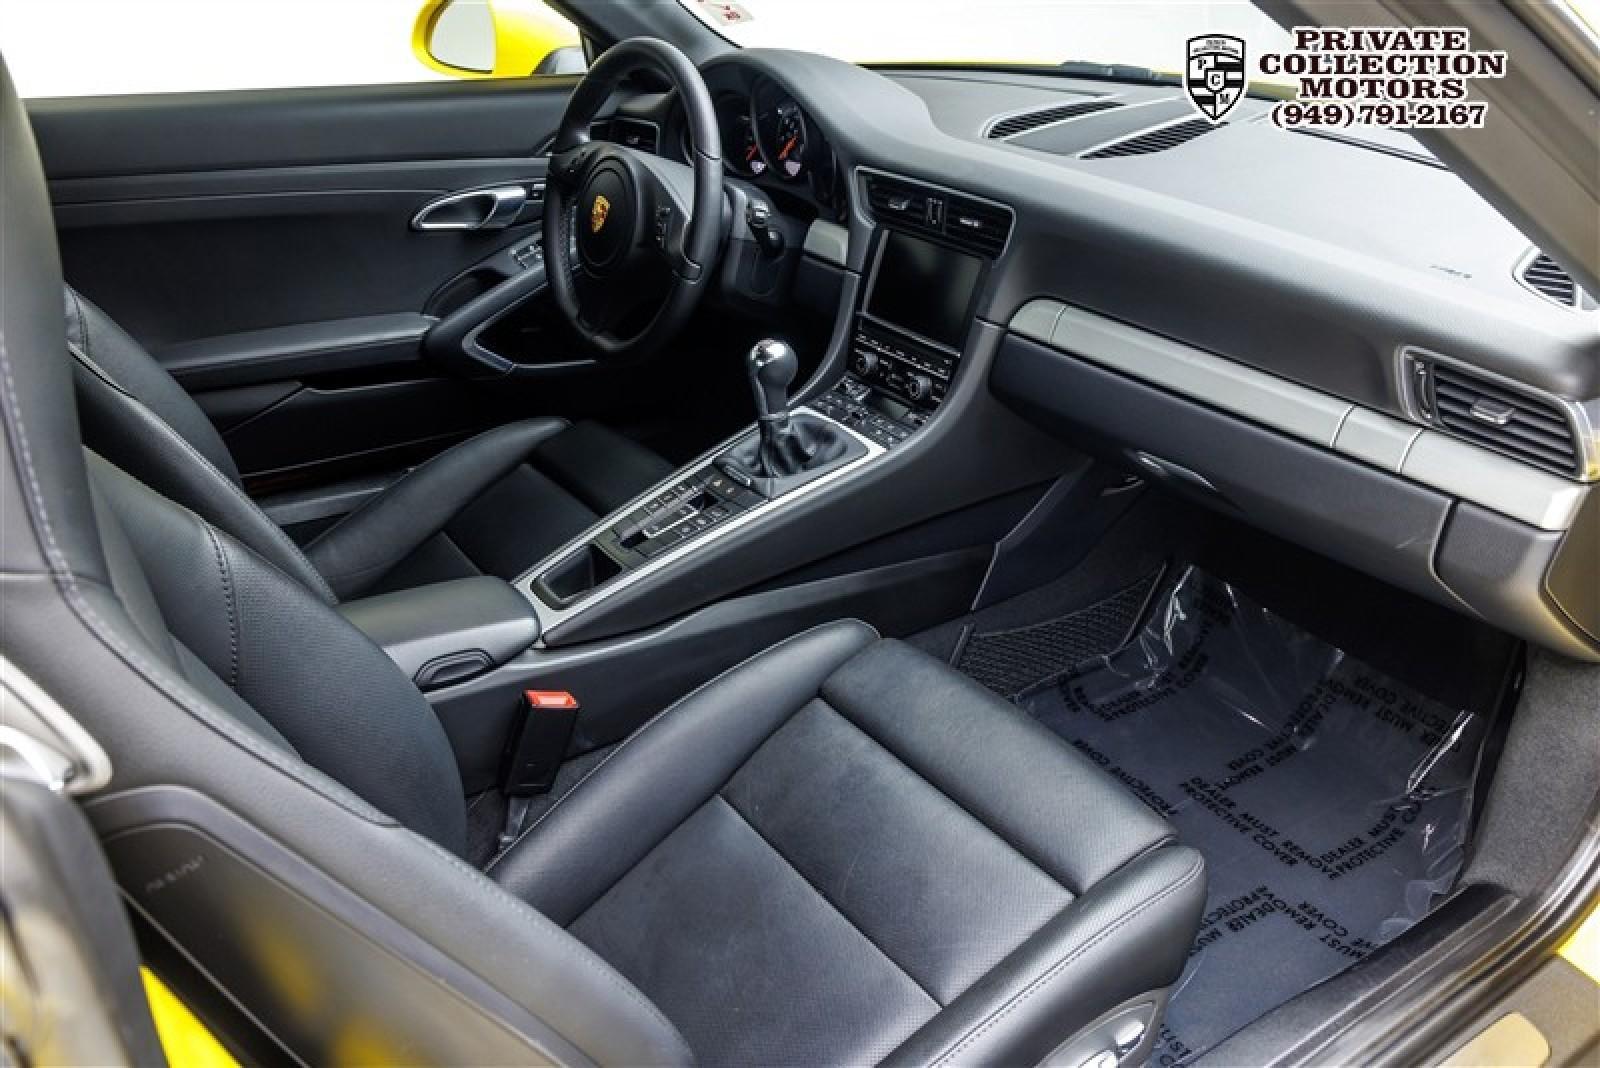 Used 2015 Porsche 911 Targa 4S Manual Transmission For Sale (Sold) |  Private Collection Motors Inc Stock #B5713A